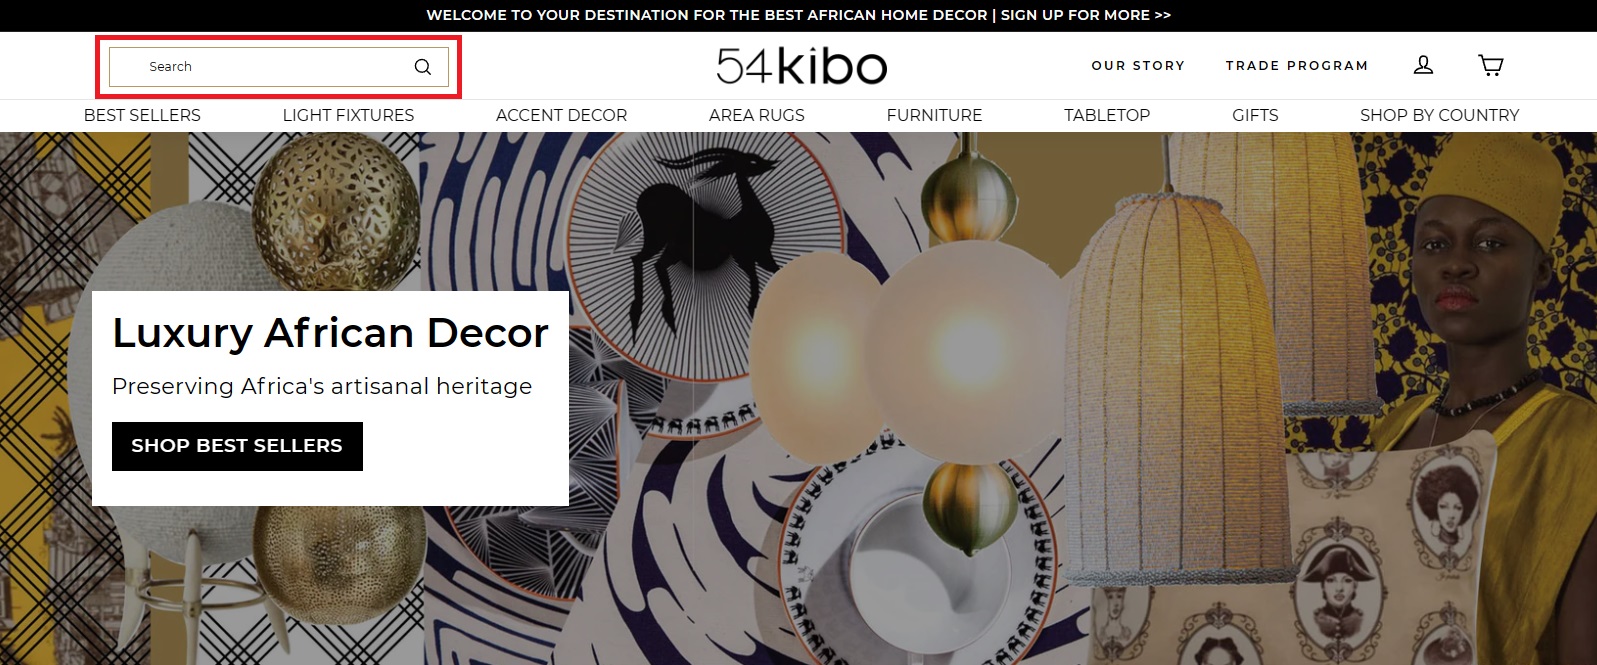 Screenshot of 54kibo's revamped e-commerce site with a prominent search bar